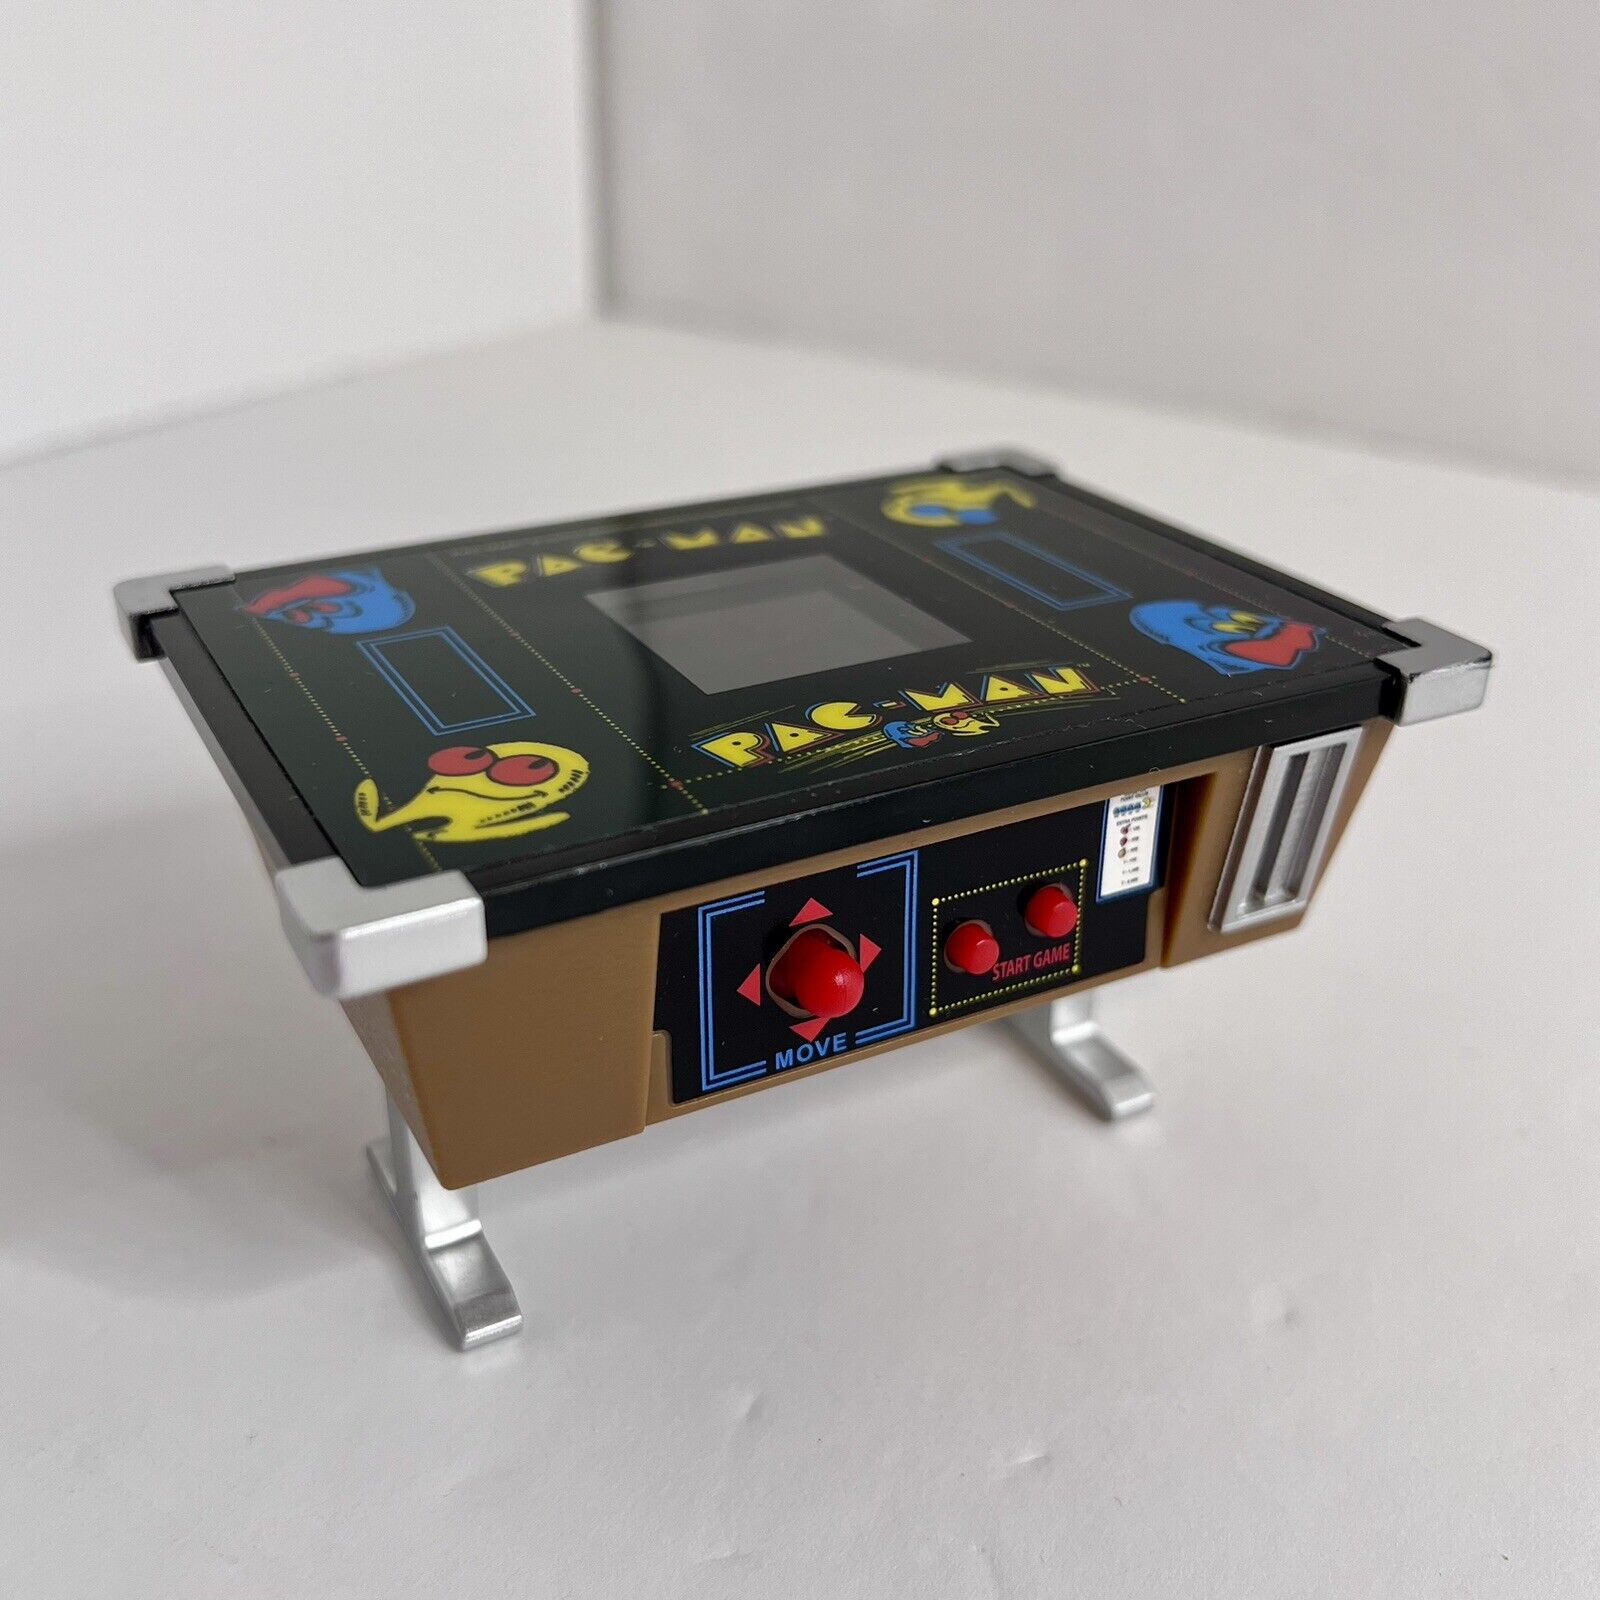 Pac-Man Tiny Arcade Tabletop Edition 2019 Worlds Smallest - Tested Works